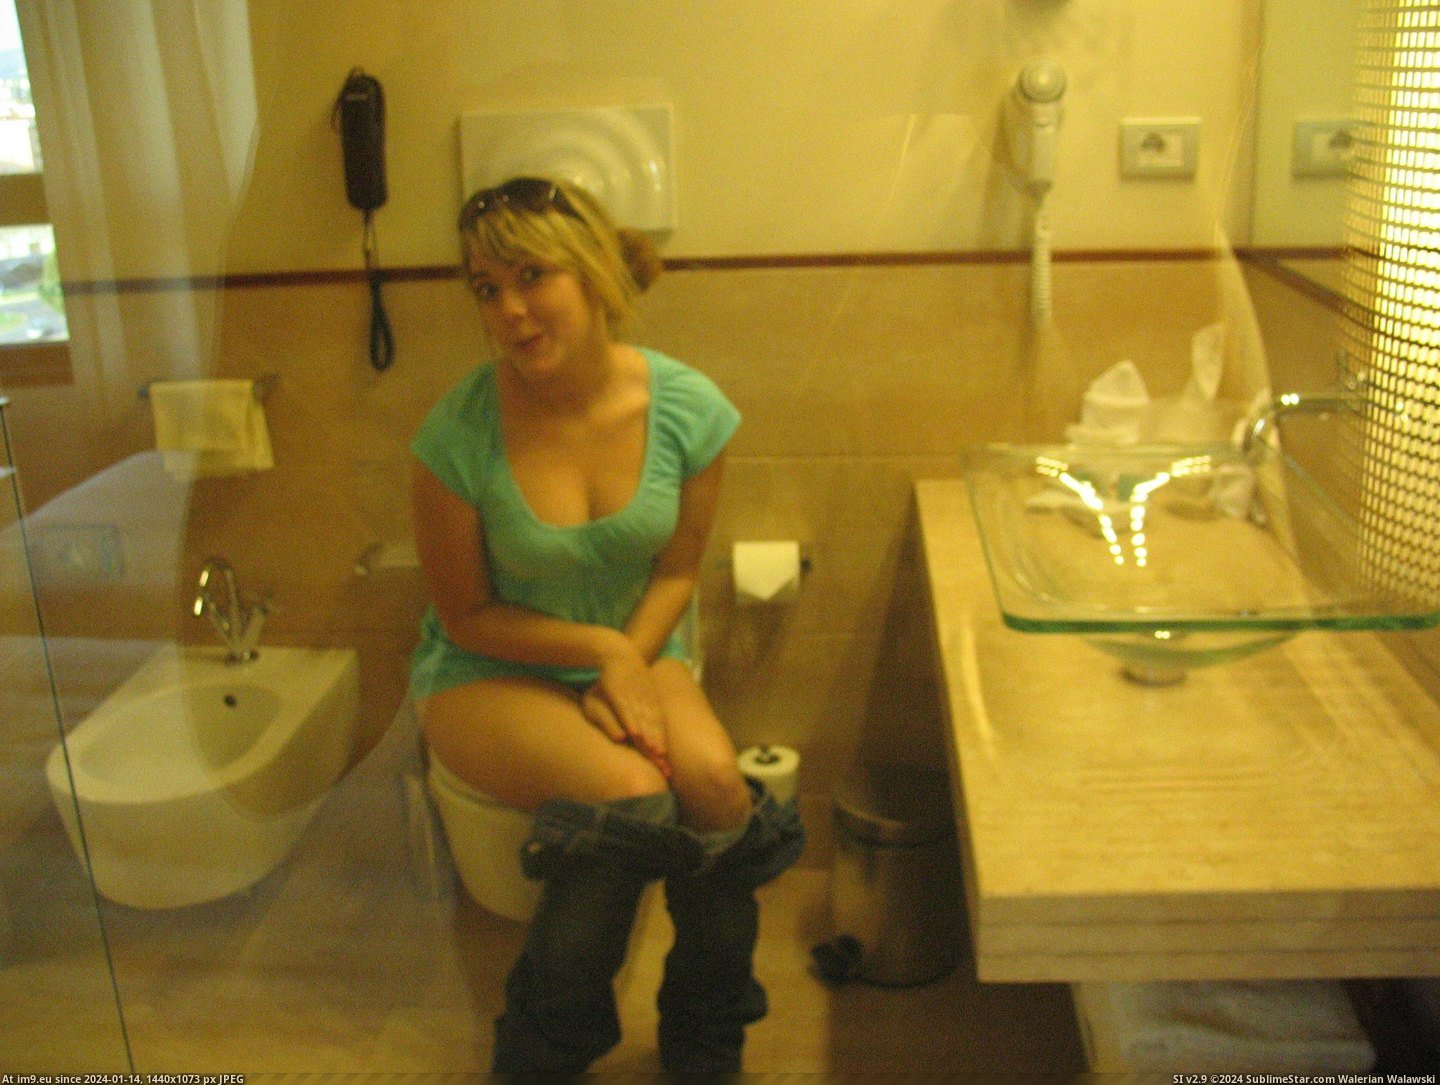 #Porn #Girls #Teen #Toilet #Bowl #Toilets #Young #Peeing #Pissing Young Teen Girls Pissing On Toilets 26 (WC toilet bowl peeing porn) Pic. (Bild von album Teen Girls Pissing Porn (Young Teens Toilet Peeing)))